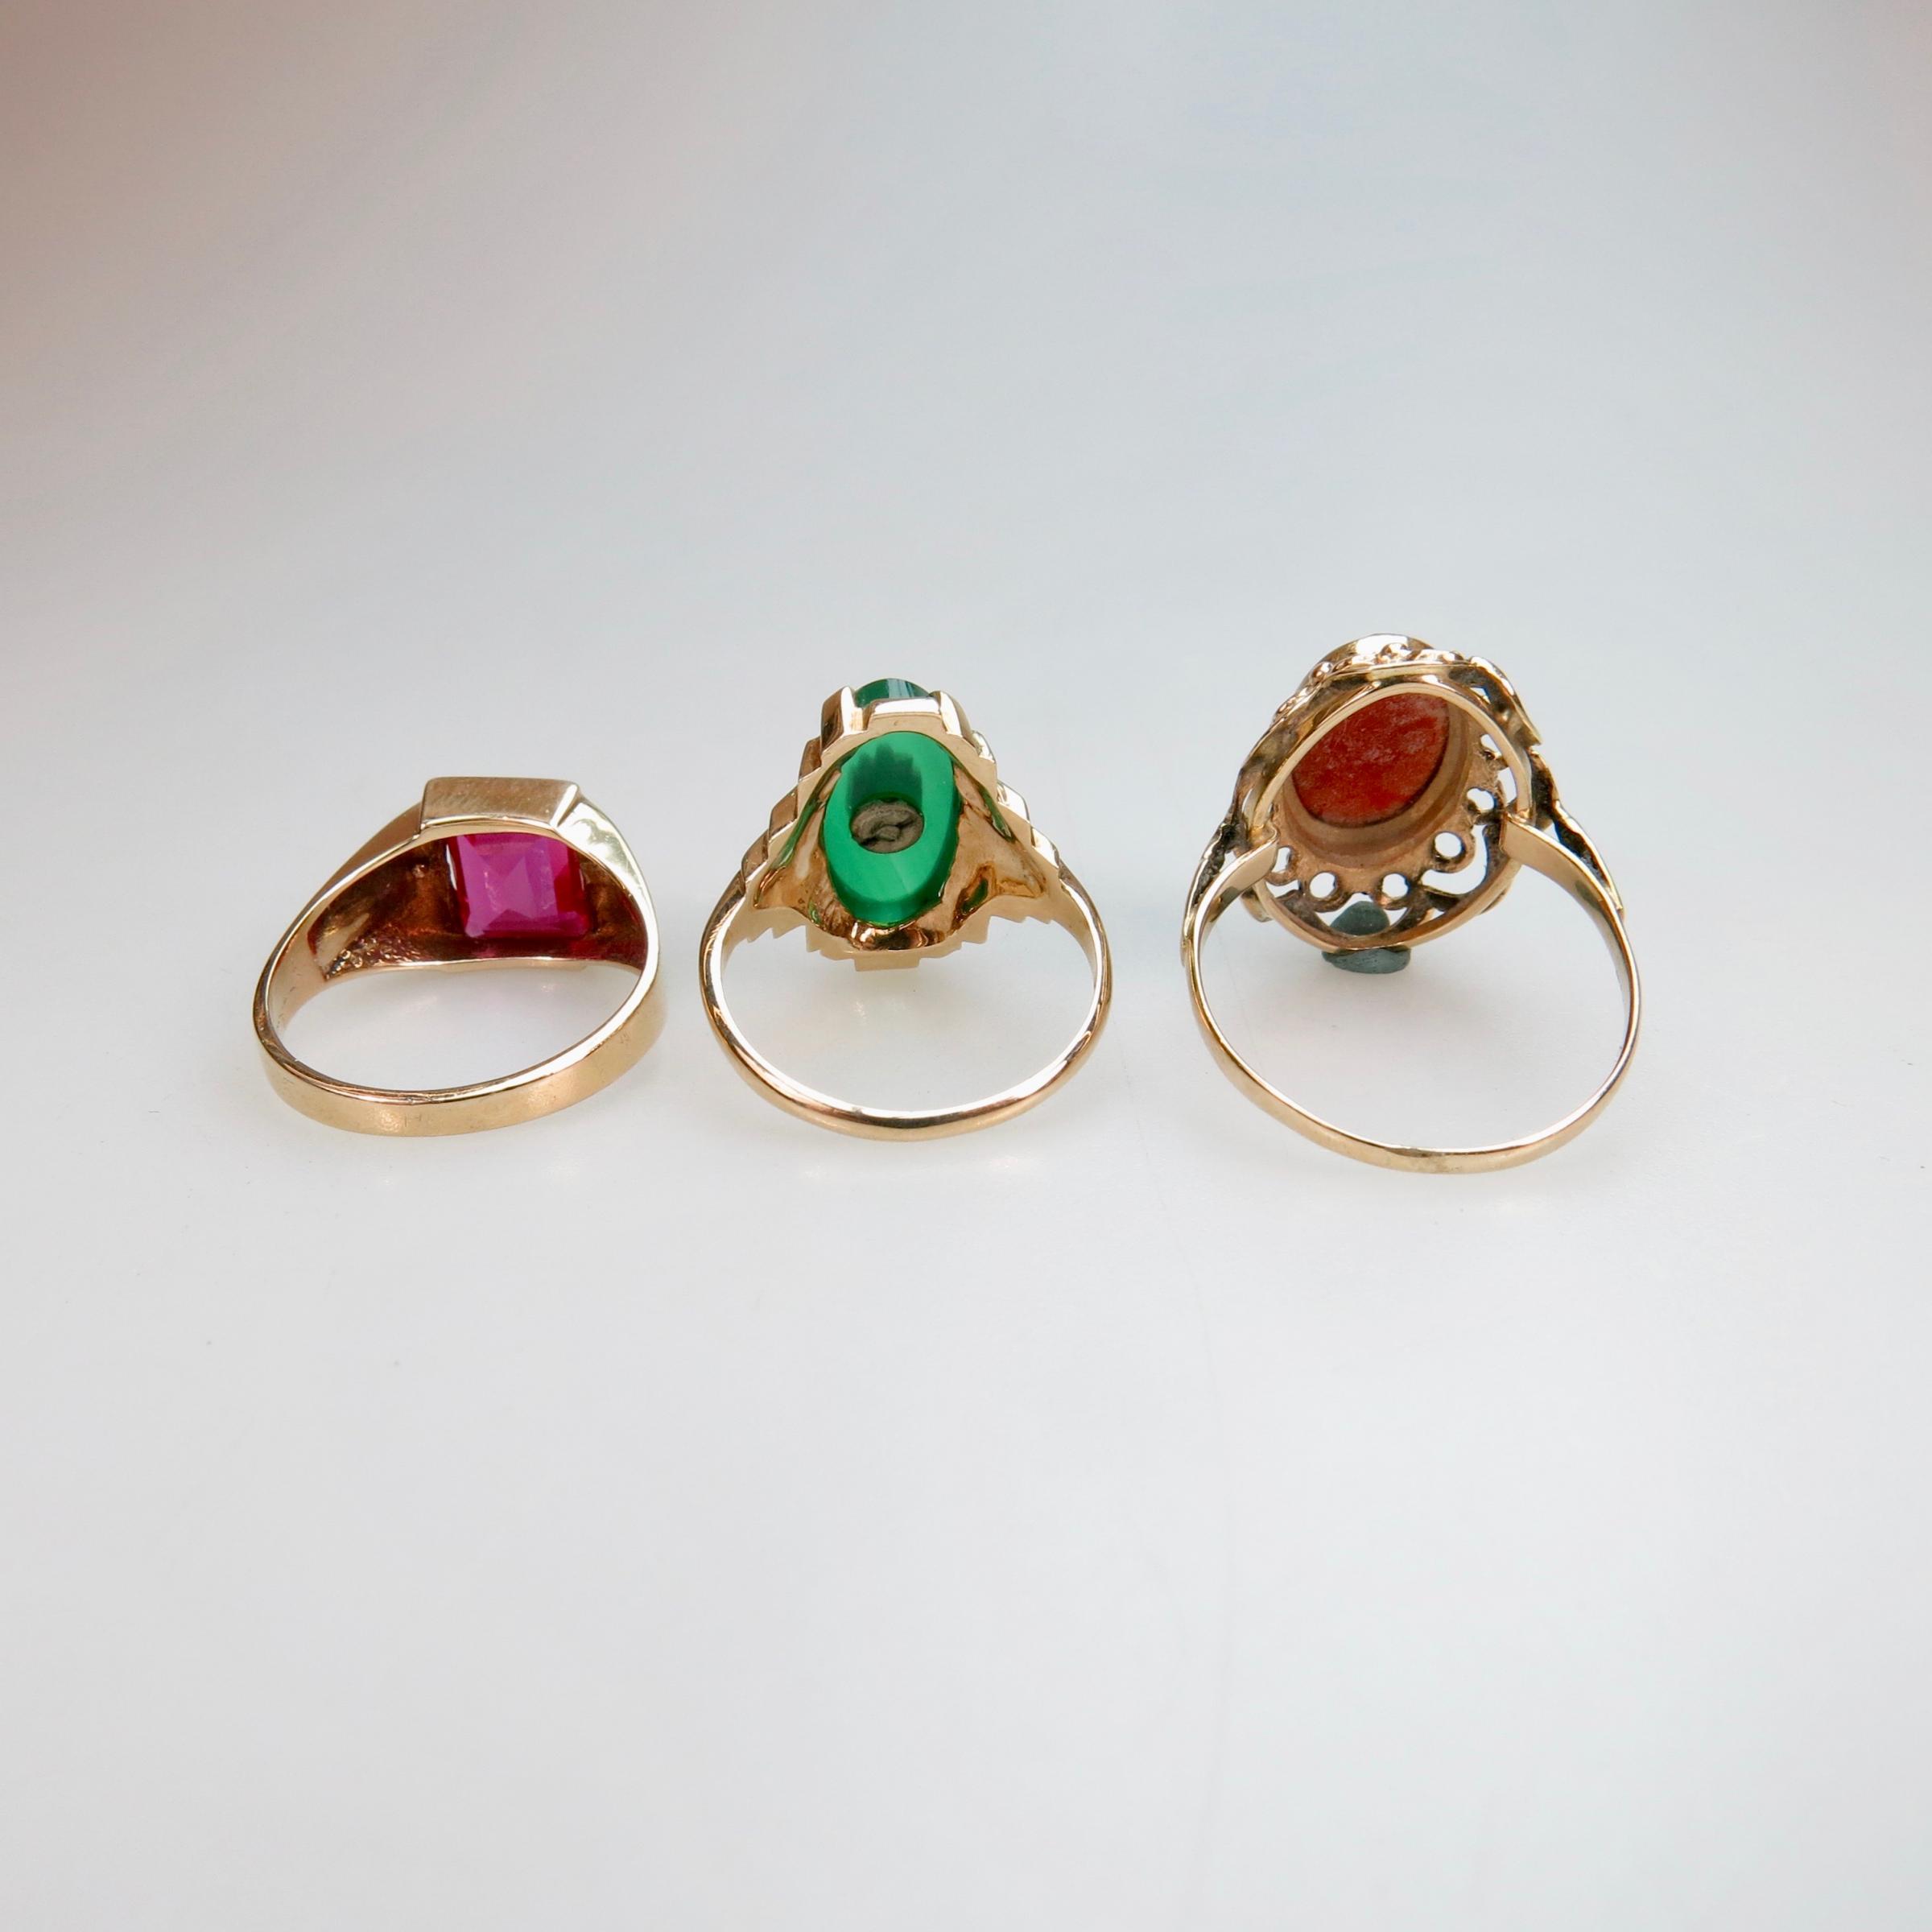 1 x 14k And 2 x 10k Yellow Gold Rings